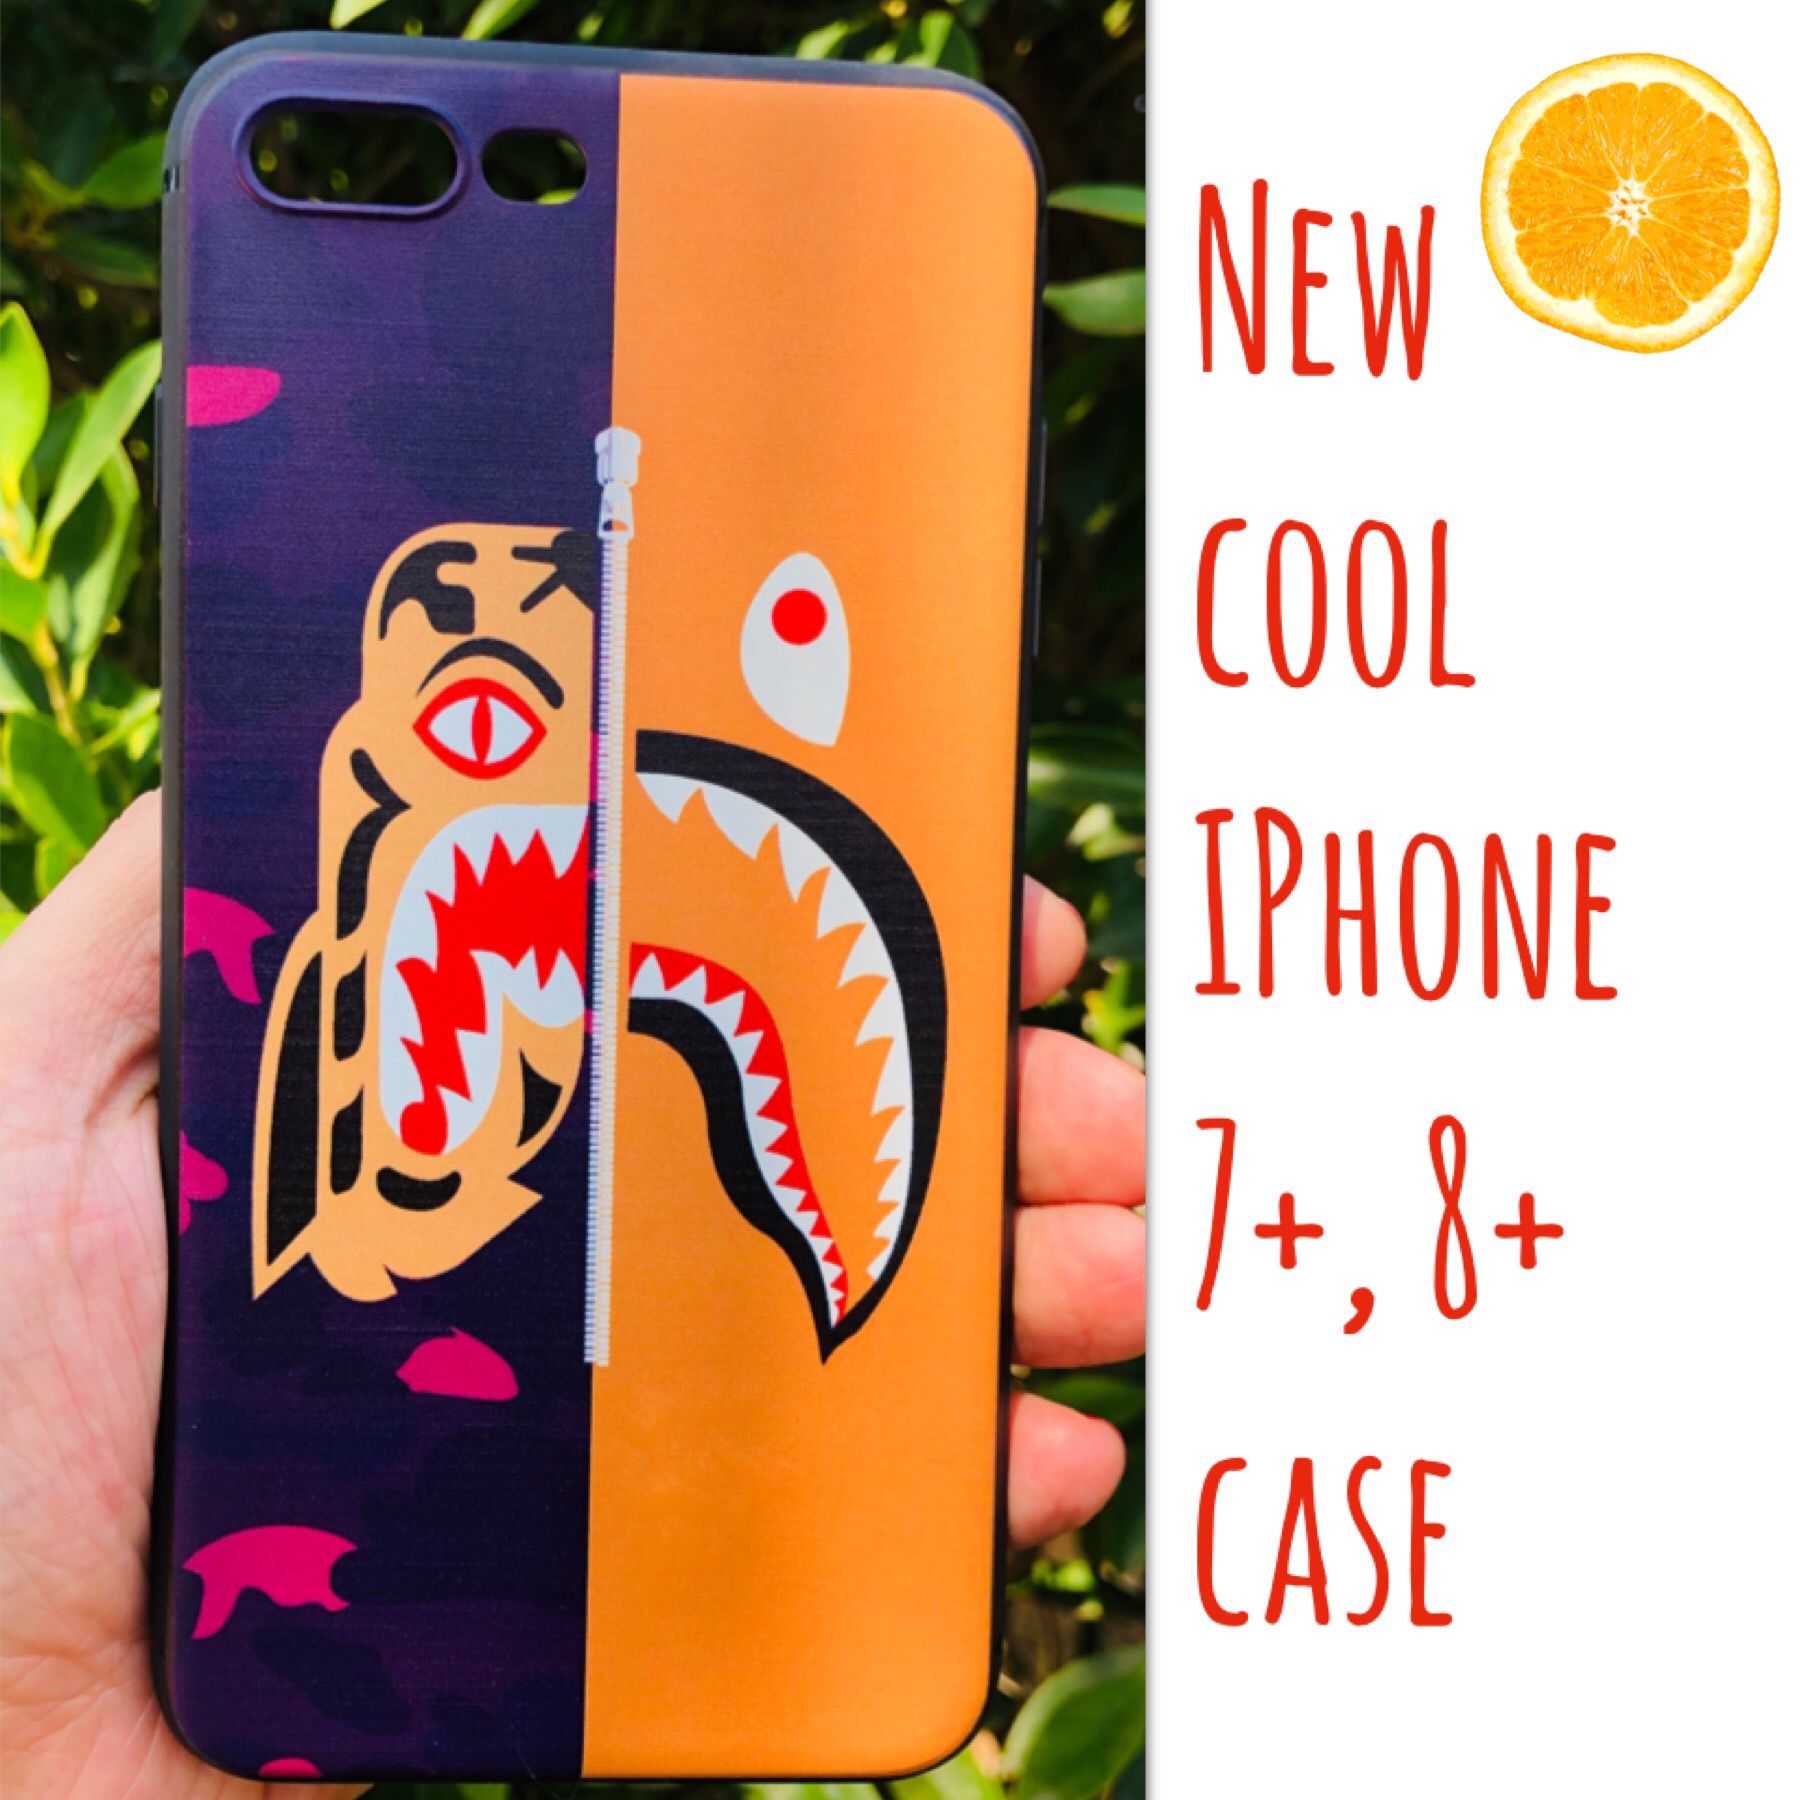 New cool iphone 7+ or iphone 8+ PLUS case rubber bape aape wgm shark hypebeast hype swag men’s women’s